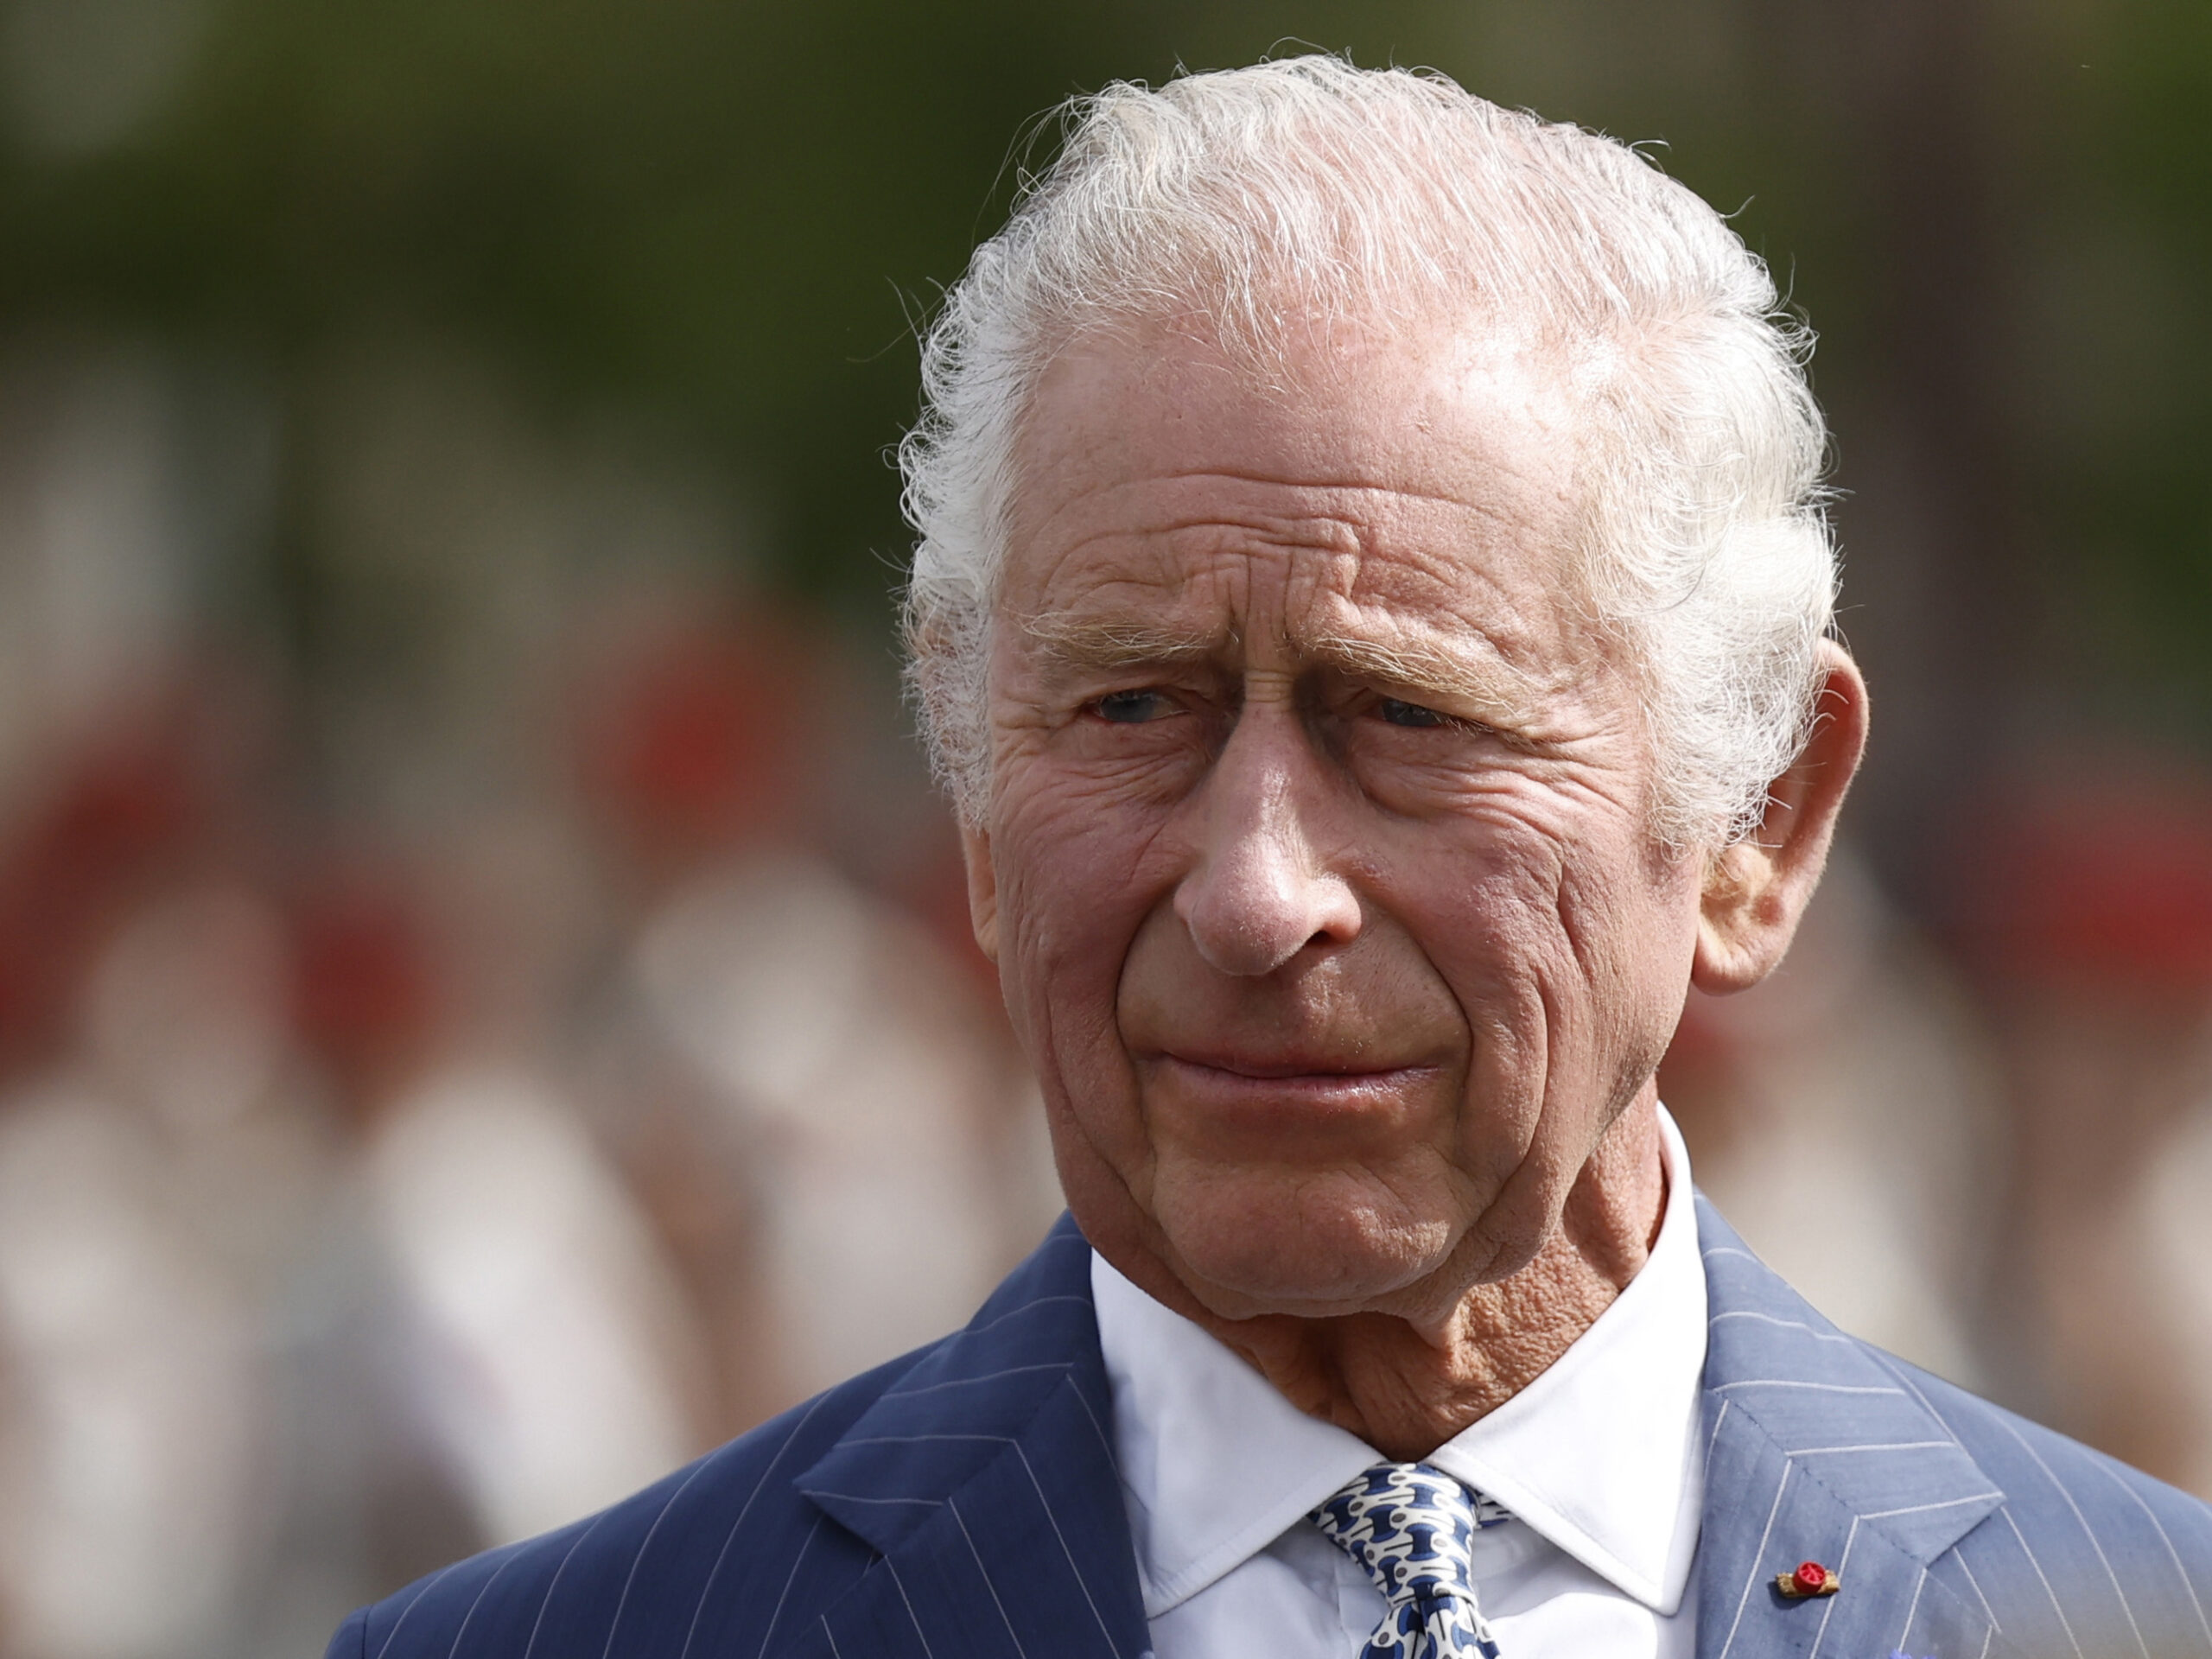 King Charles III ‘doing well’ after scheduled prostate treatment, Queen Camilla says